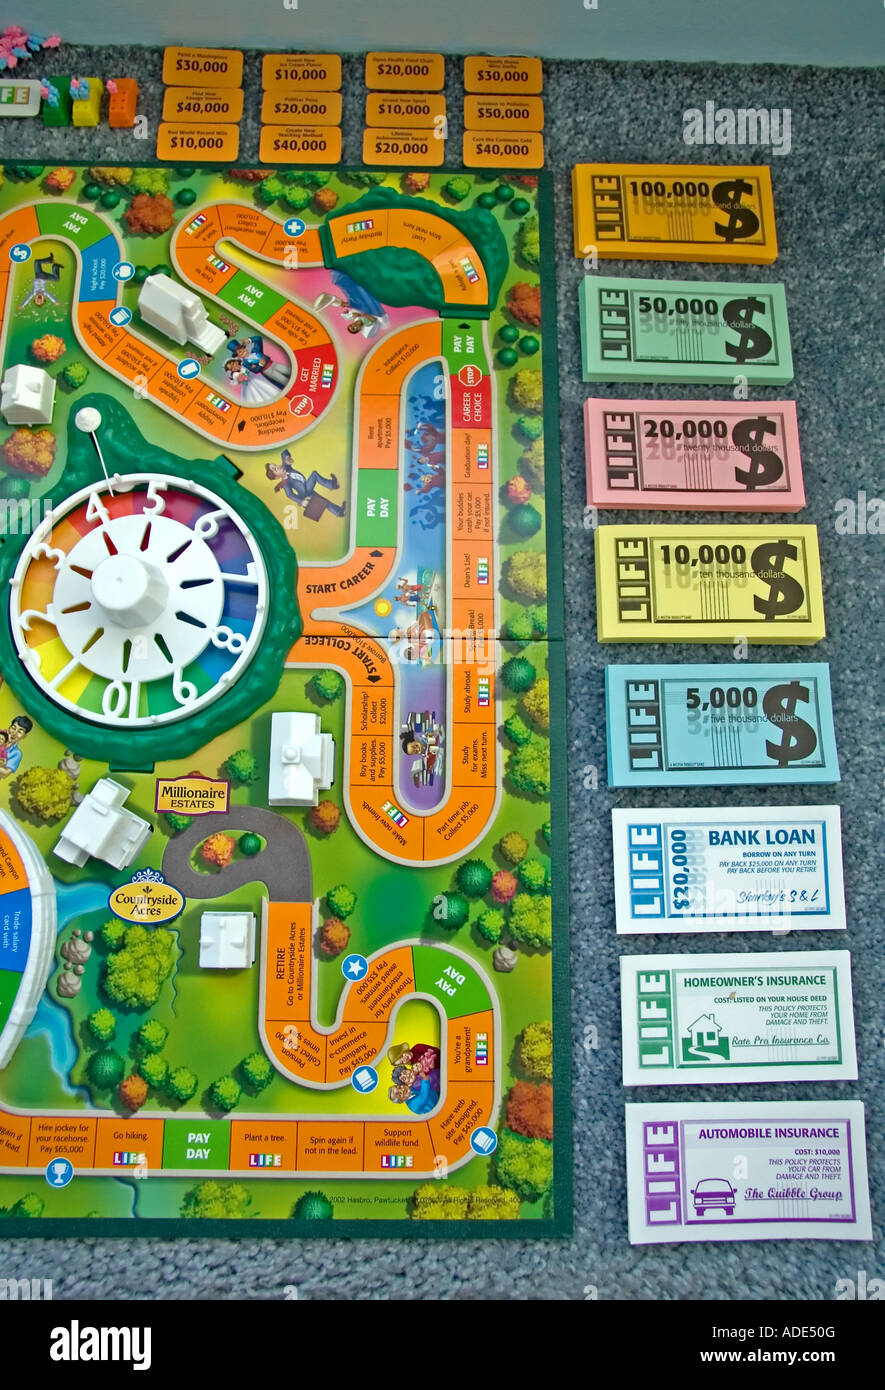 game of life board game free download